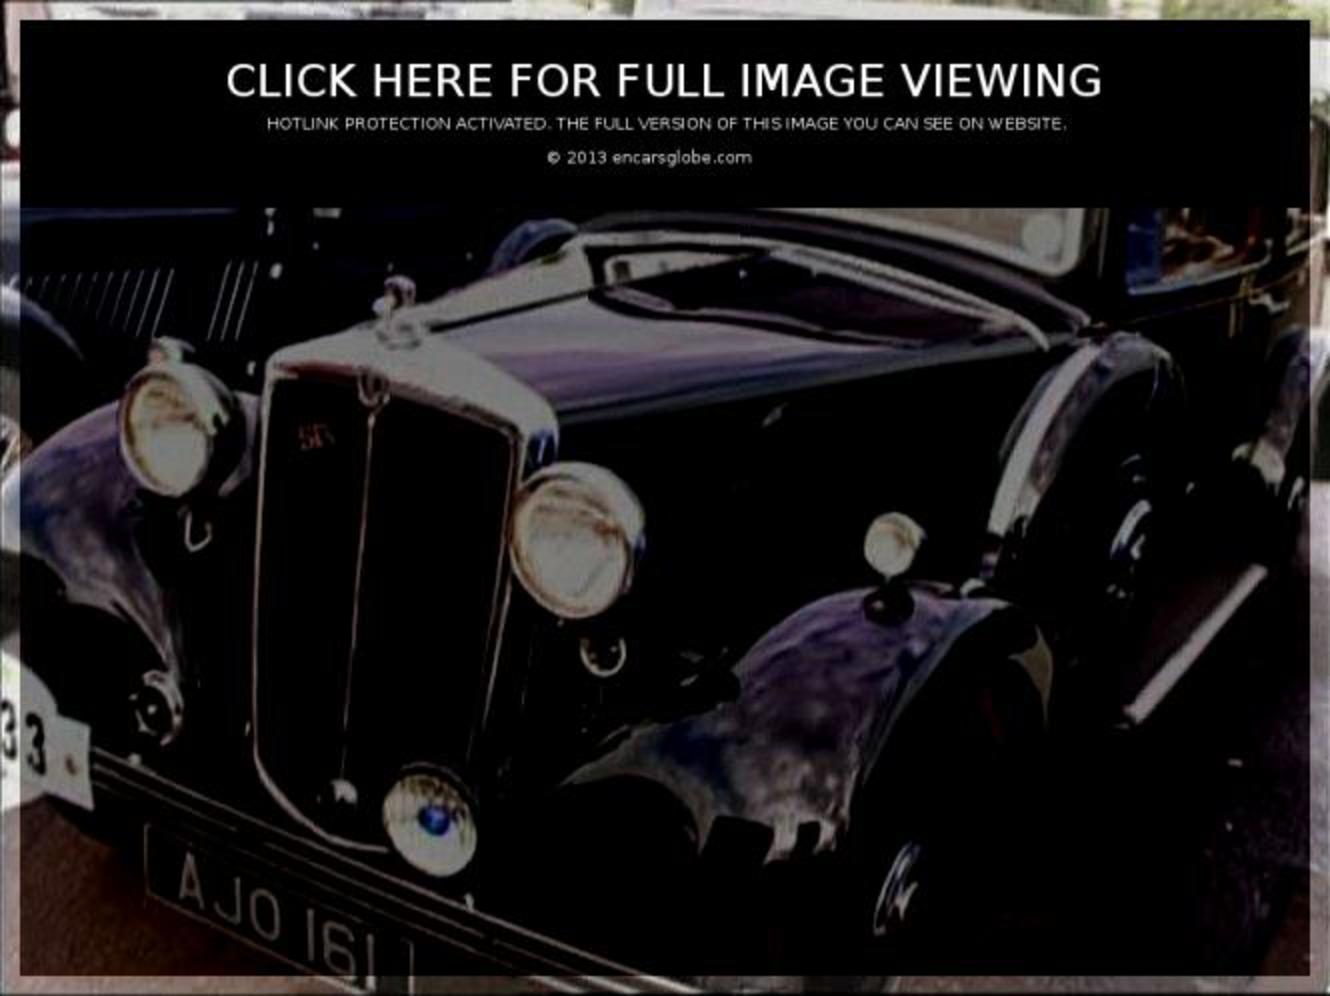 Morris Eight 2dr Photo Gallery: Photo #01 out of 10, Image Size ...